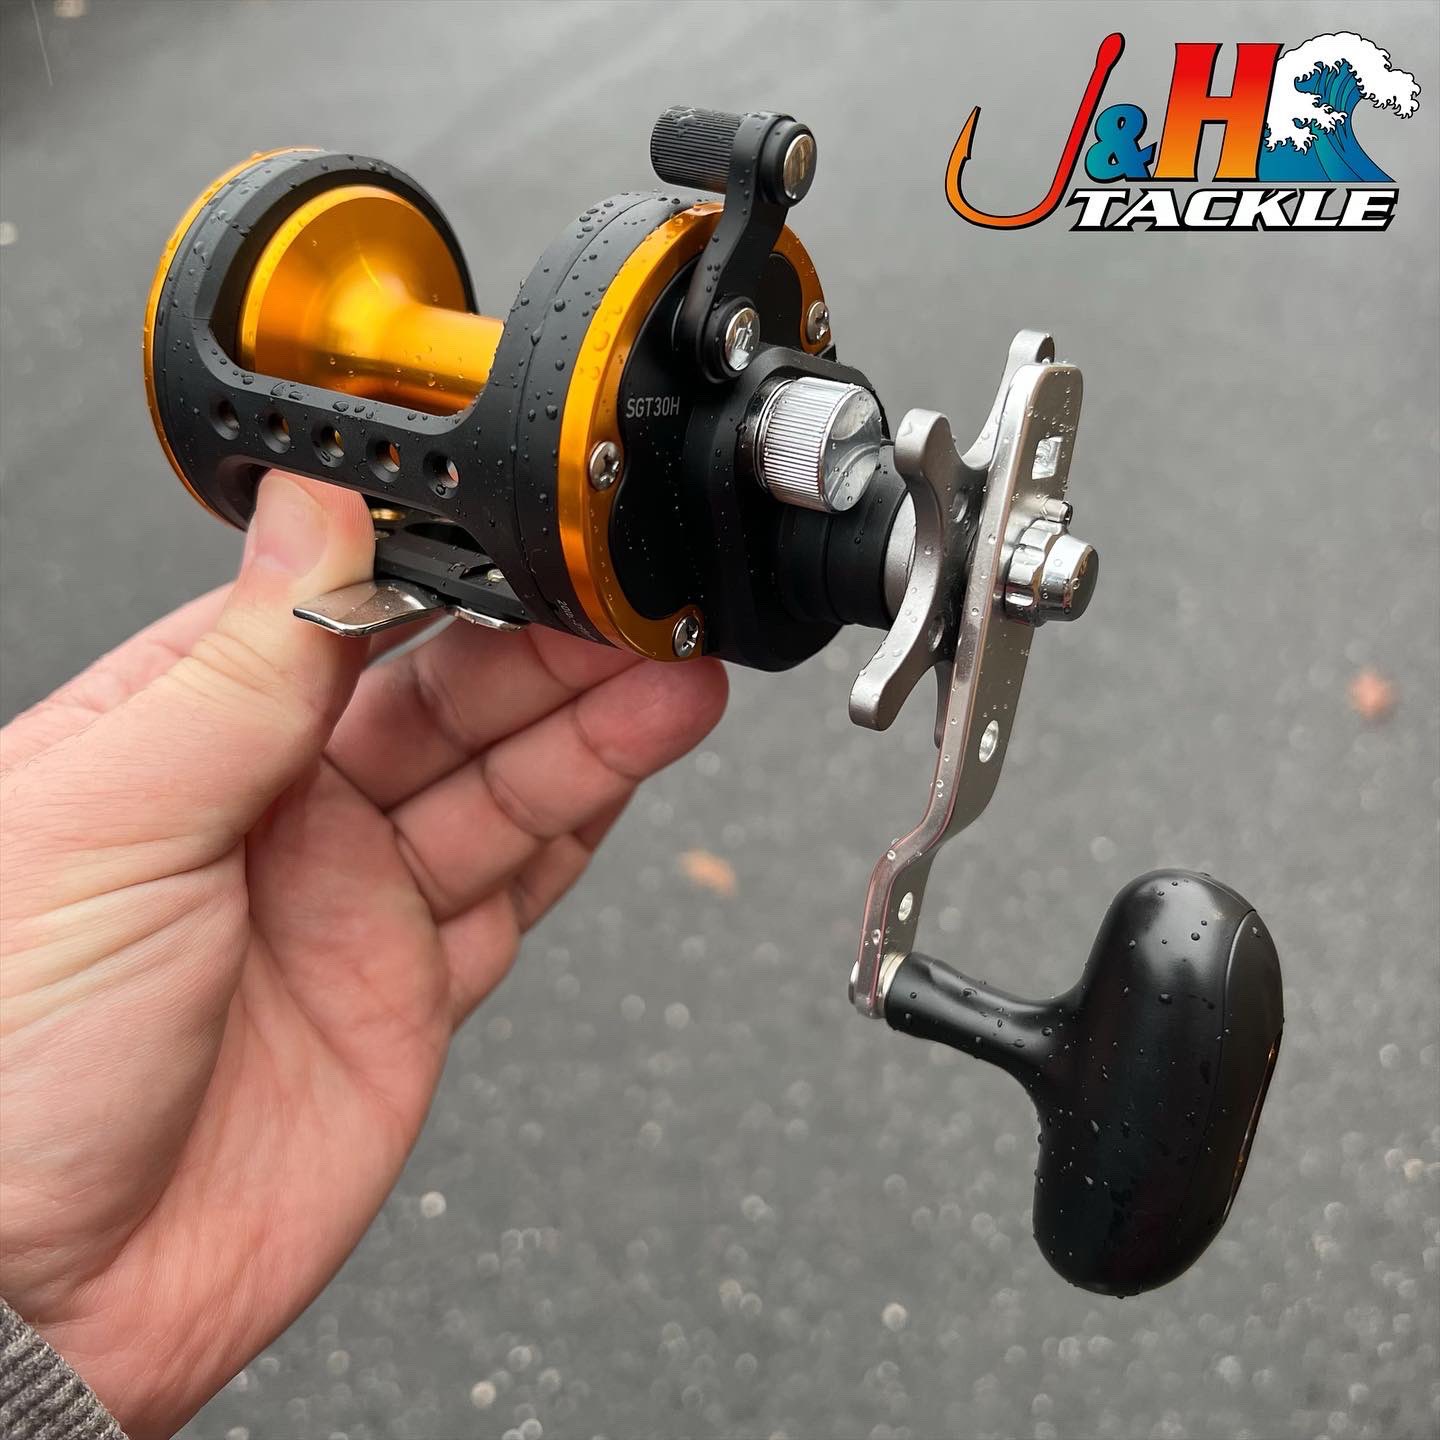 J&H Tackle on X: Daiwa Seagate is a hell of a reel for the money!   #jandhtackle #fishing #jigging #saltwater #daiwa  @daiwausa  / X